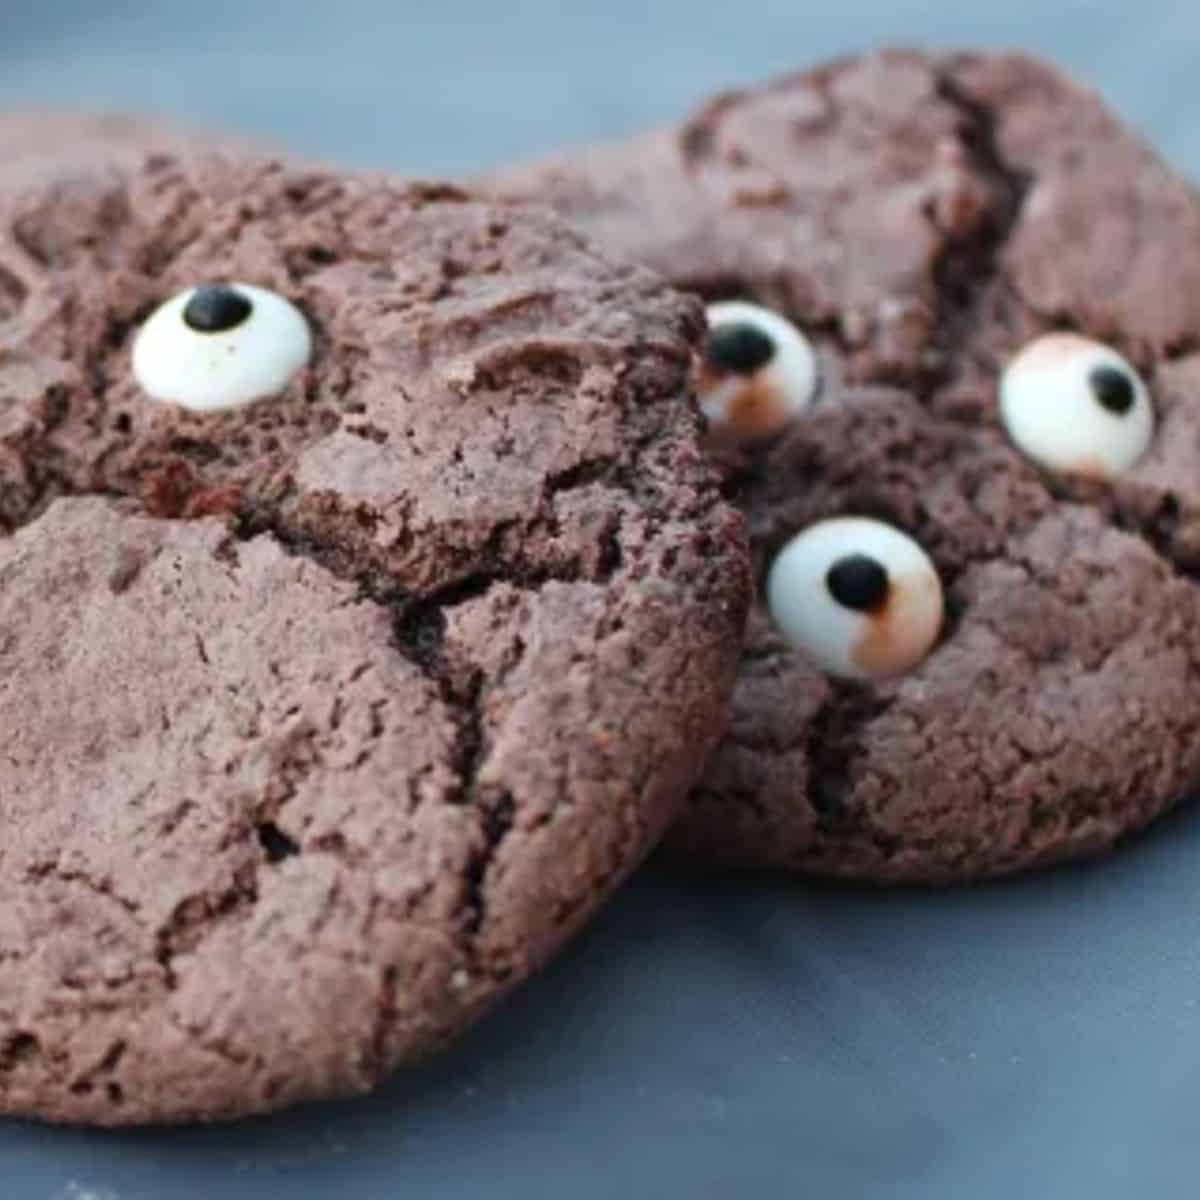 A close-up photo of a gluten-free monster cookie's candy eyeball, its shiny surface and realistic details